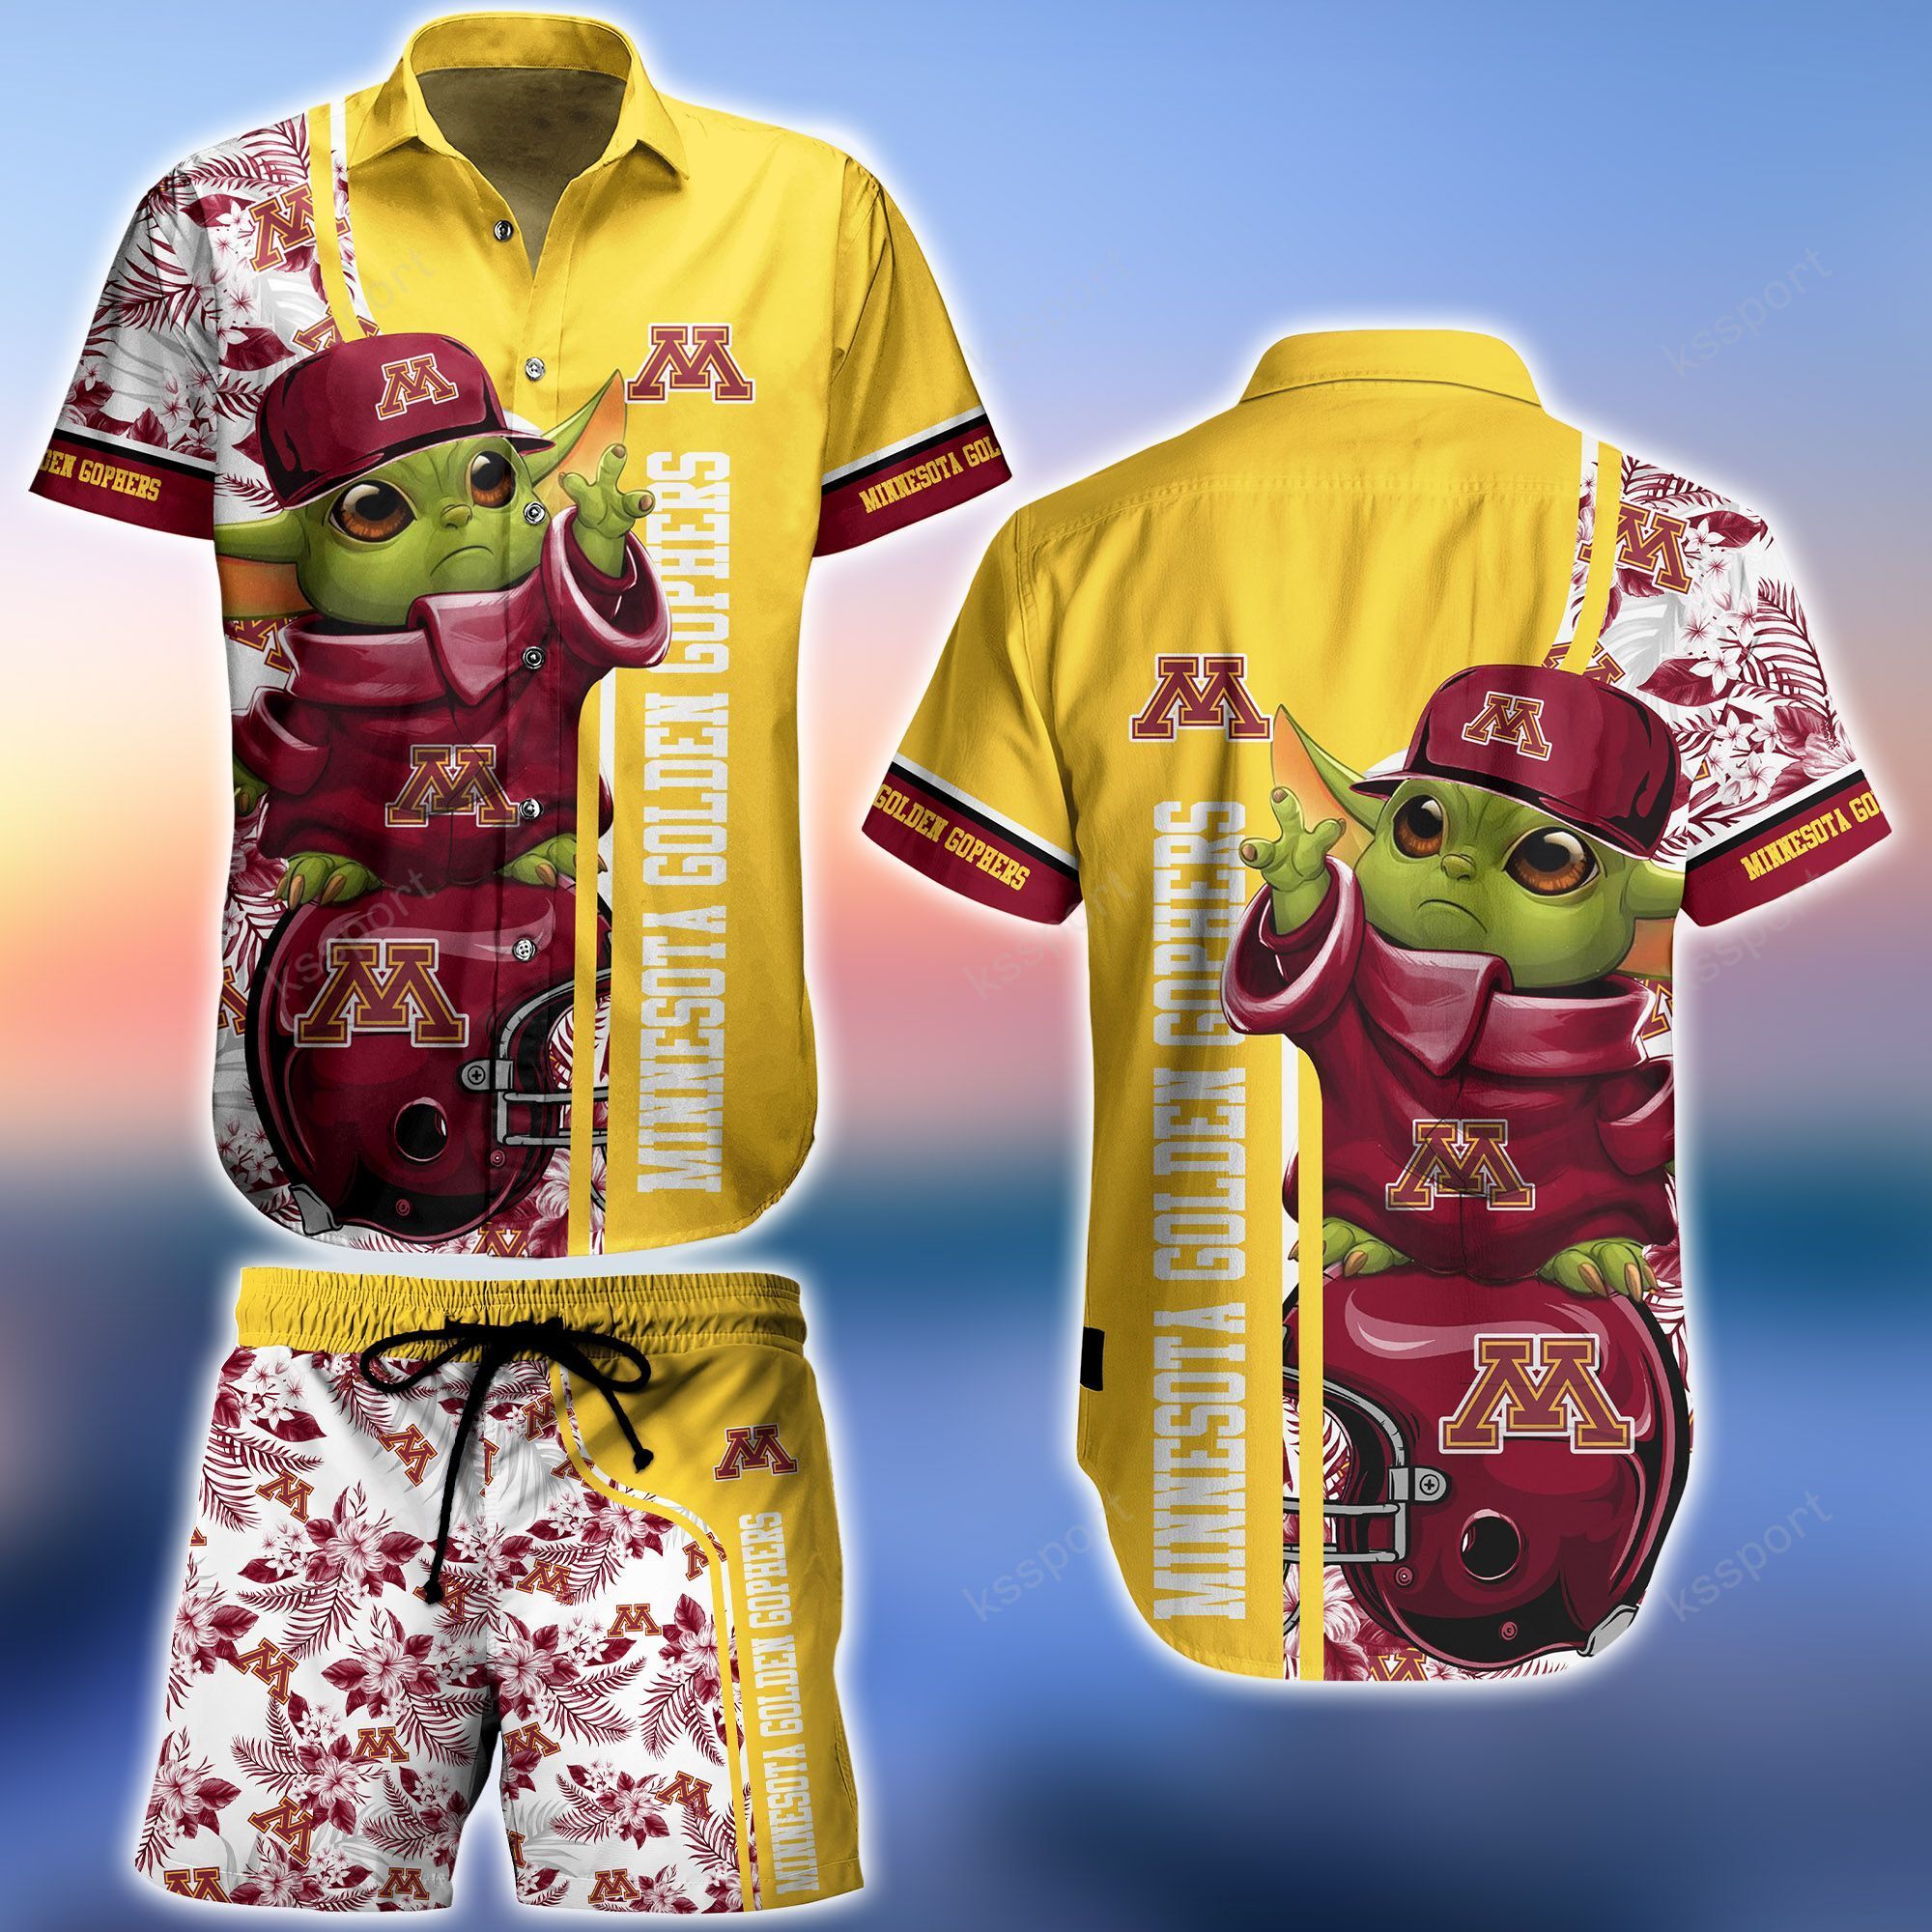 Make sure to check out the latest summer fashion on our website 1